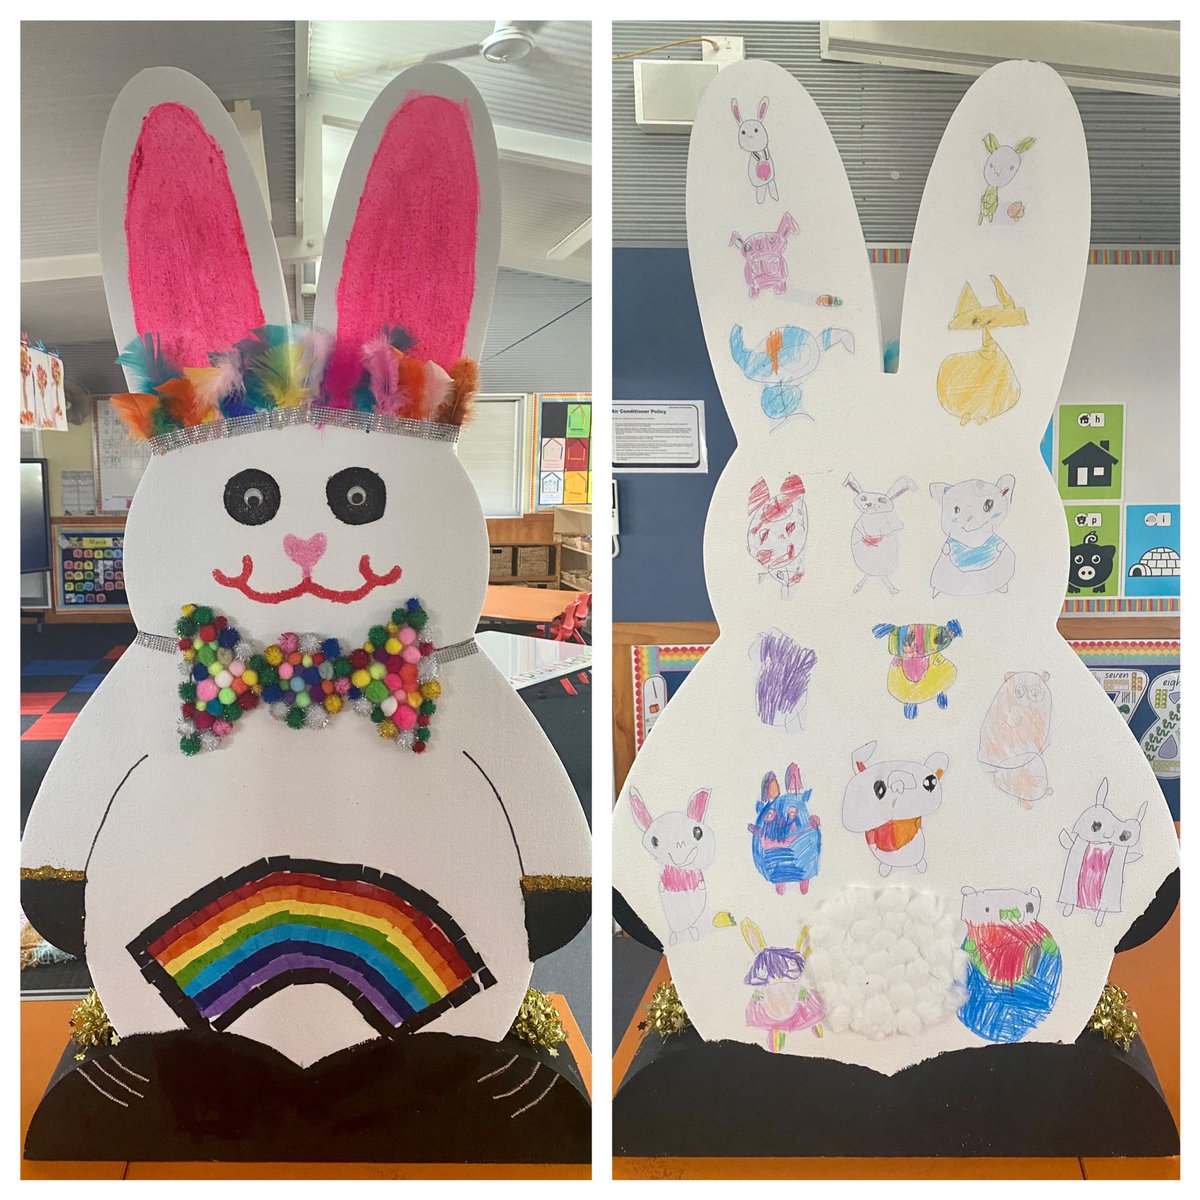 Our bunny is ready to be delivered to our local shopping center. 💖 We planned and discussed, collaborated, created and worked together to produce an entry that we’re proud of. 🥰 #AgeAppropriatePedagogies #BlendedApproach #WeHadFun